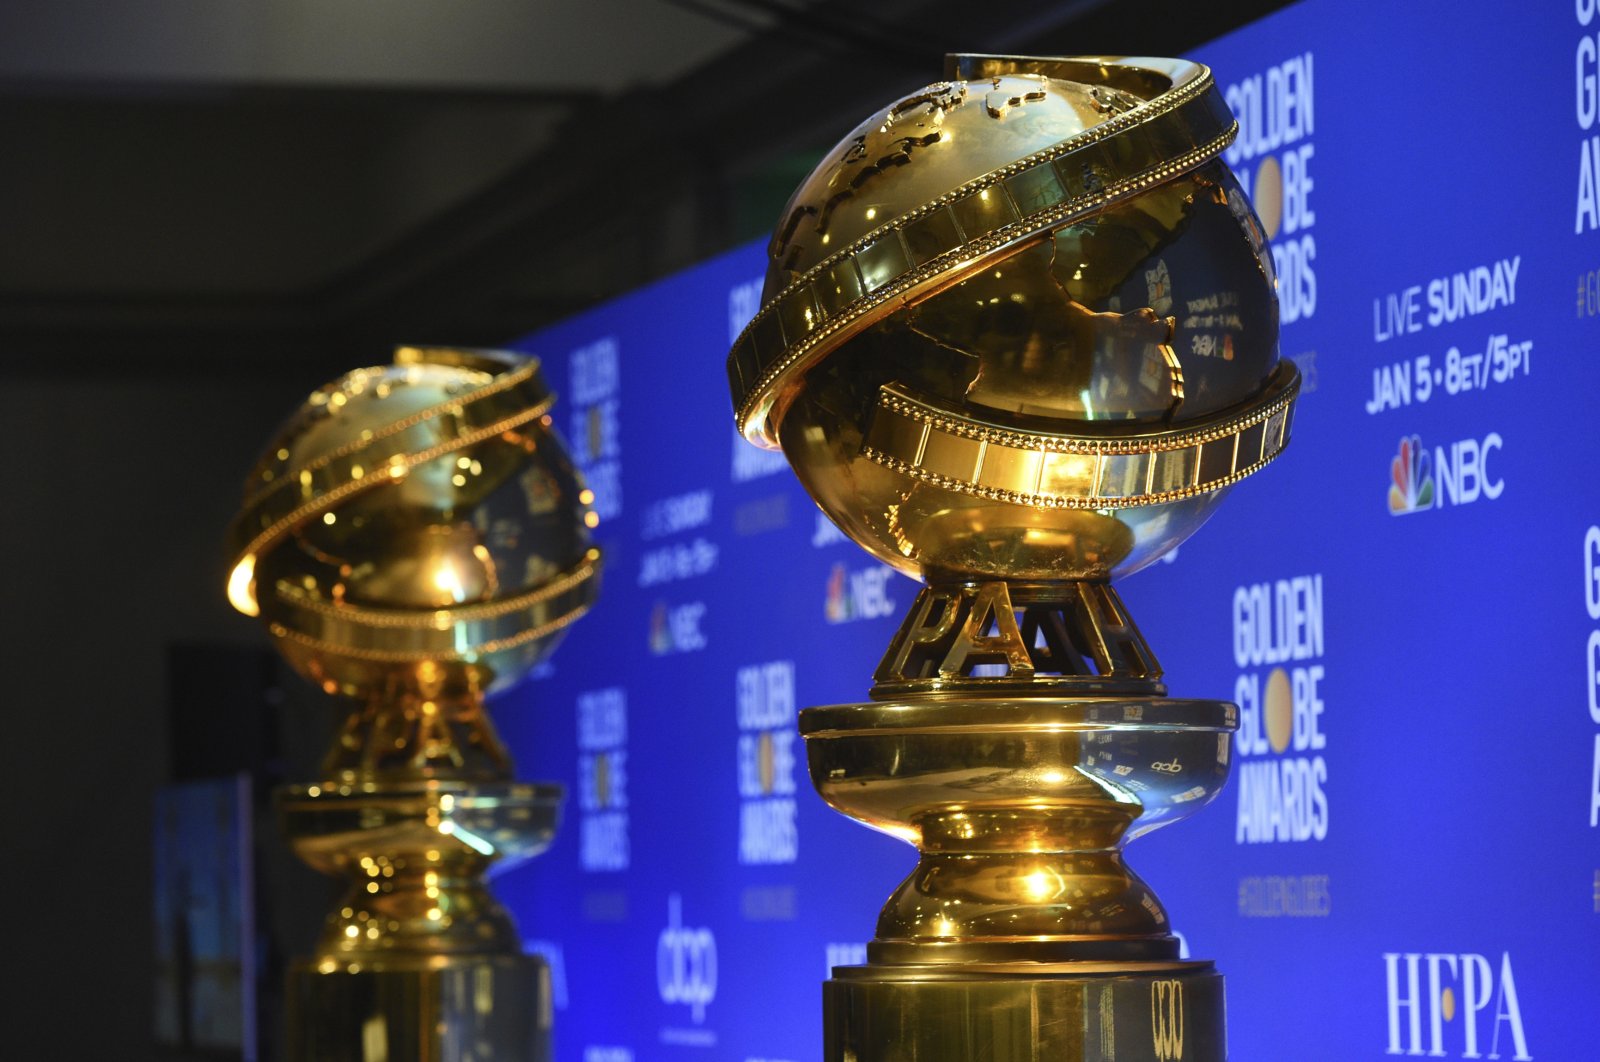 Replicas of Golden Globe statues at the nominations for the 77th annual Golden Globe Awards in Beverly Hills, Calif., U.S. on Dec. 9, 2019. (AP Photo)